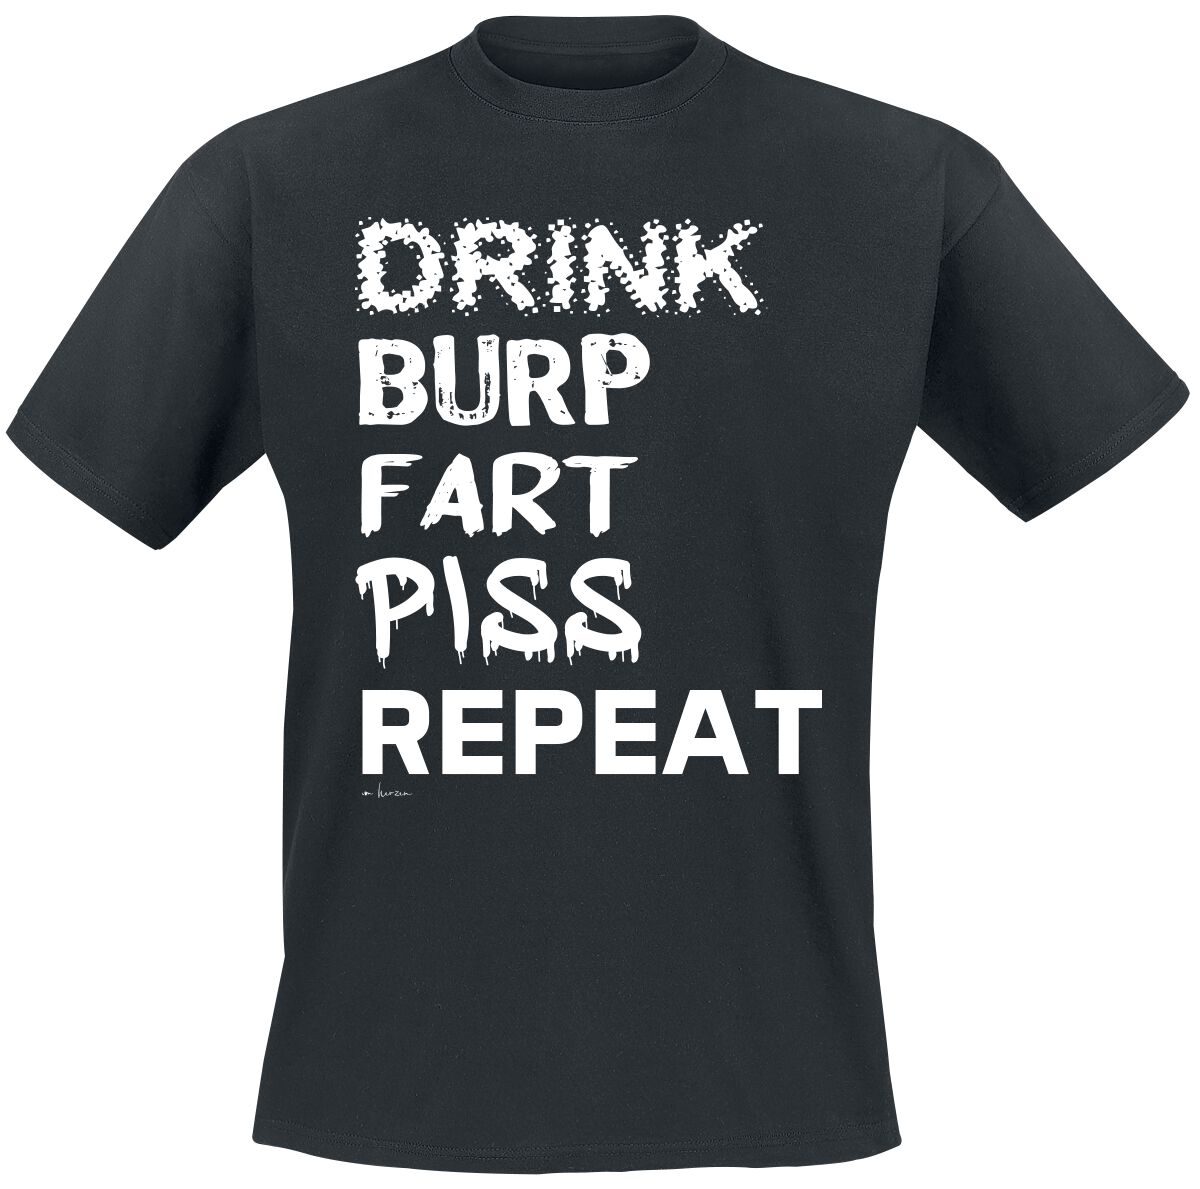 Alcohol & Party Drink Burp Fart Piss Repeat T-Shirt black